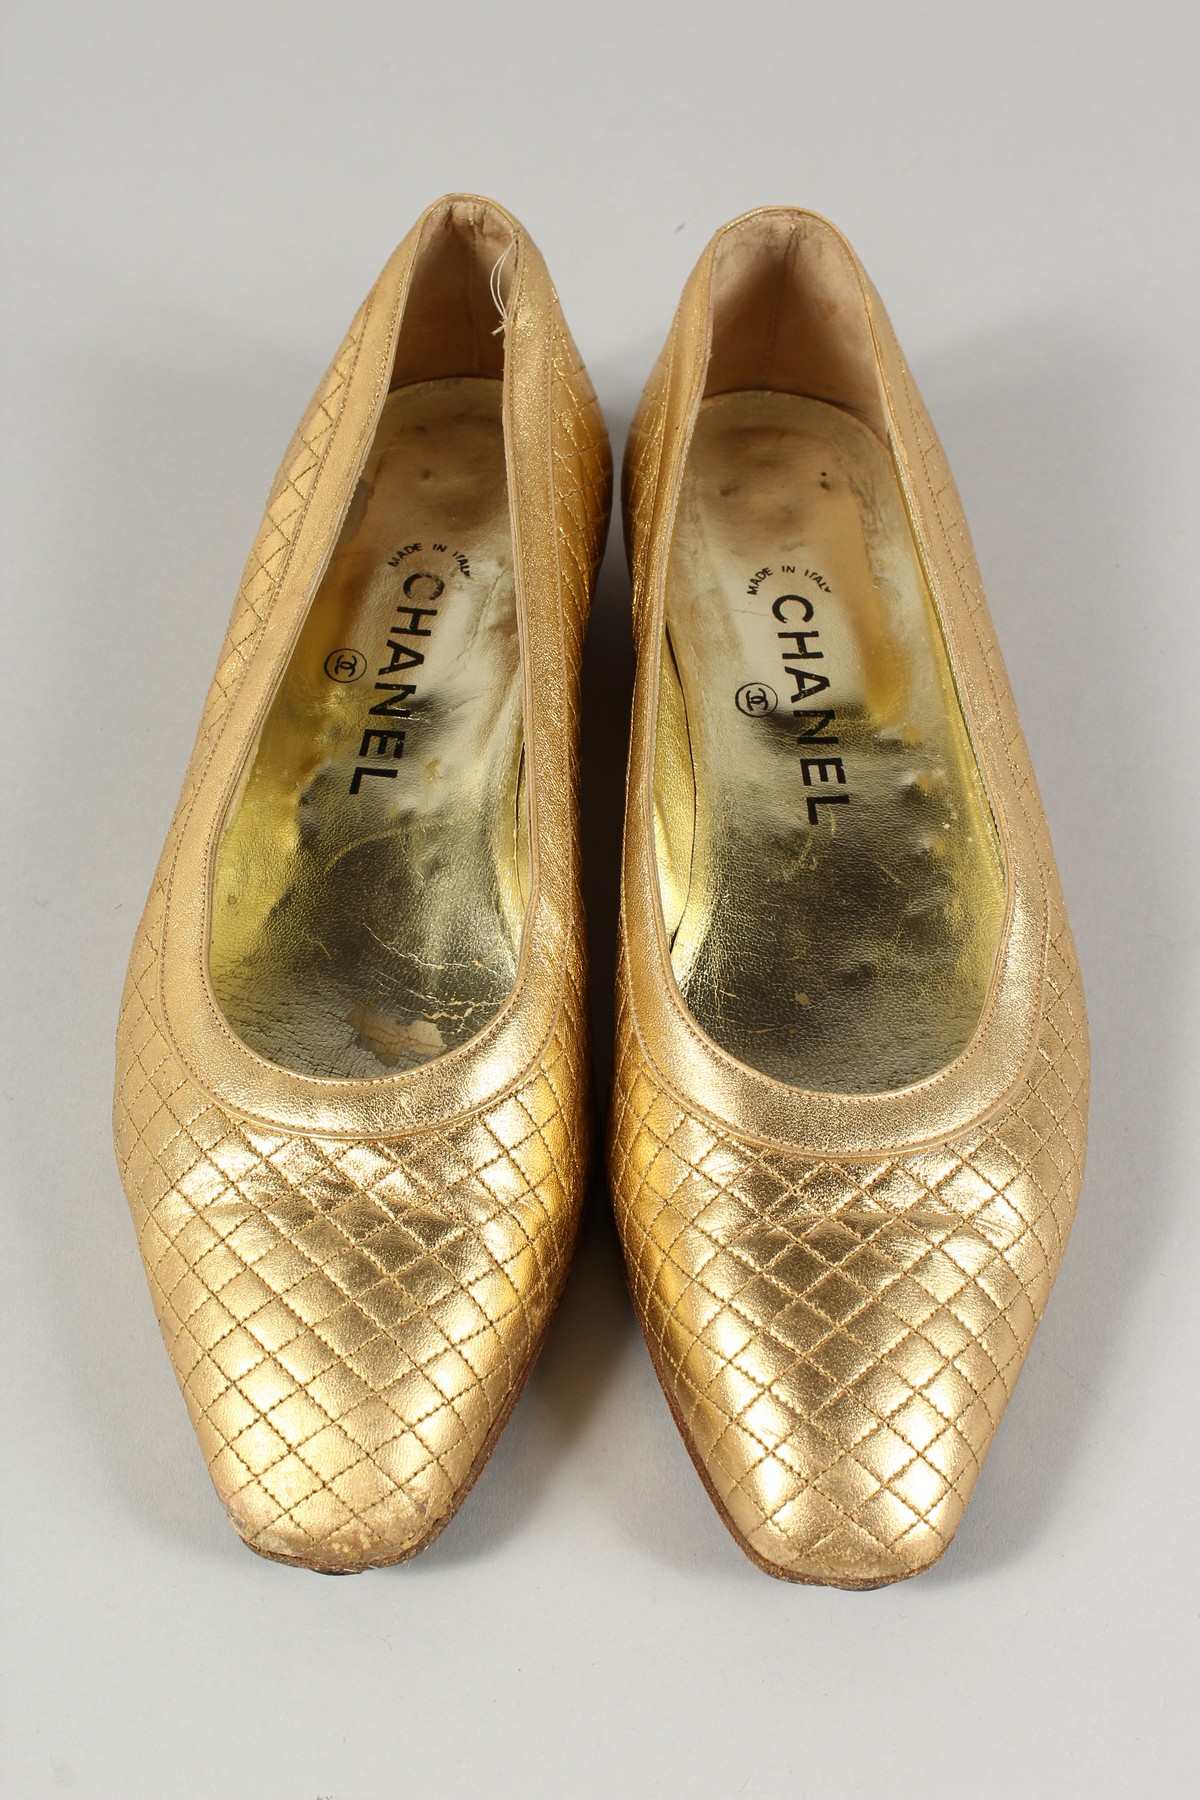 A PAIR OF CHANEL, SIZE 39.5, GOLD COLOUR SHOES. - Image 2 of 7